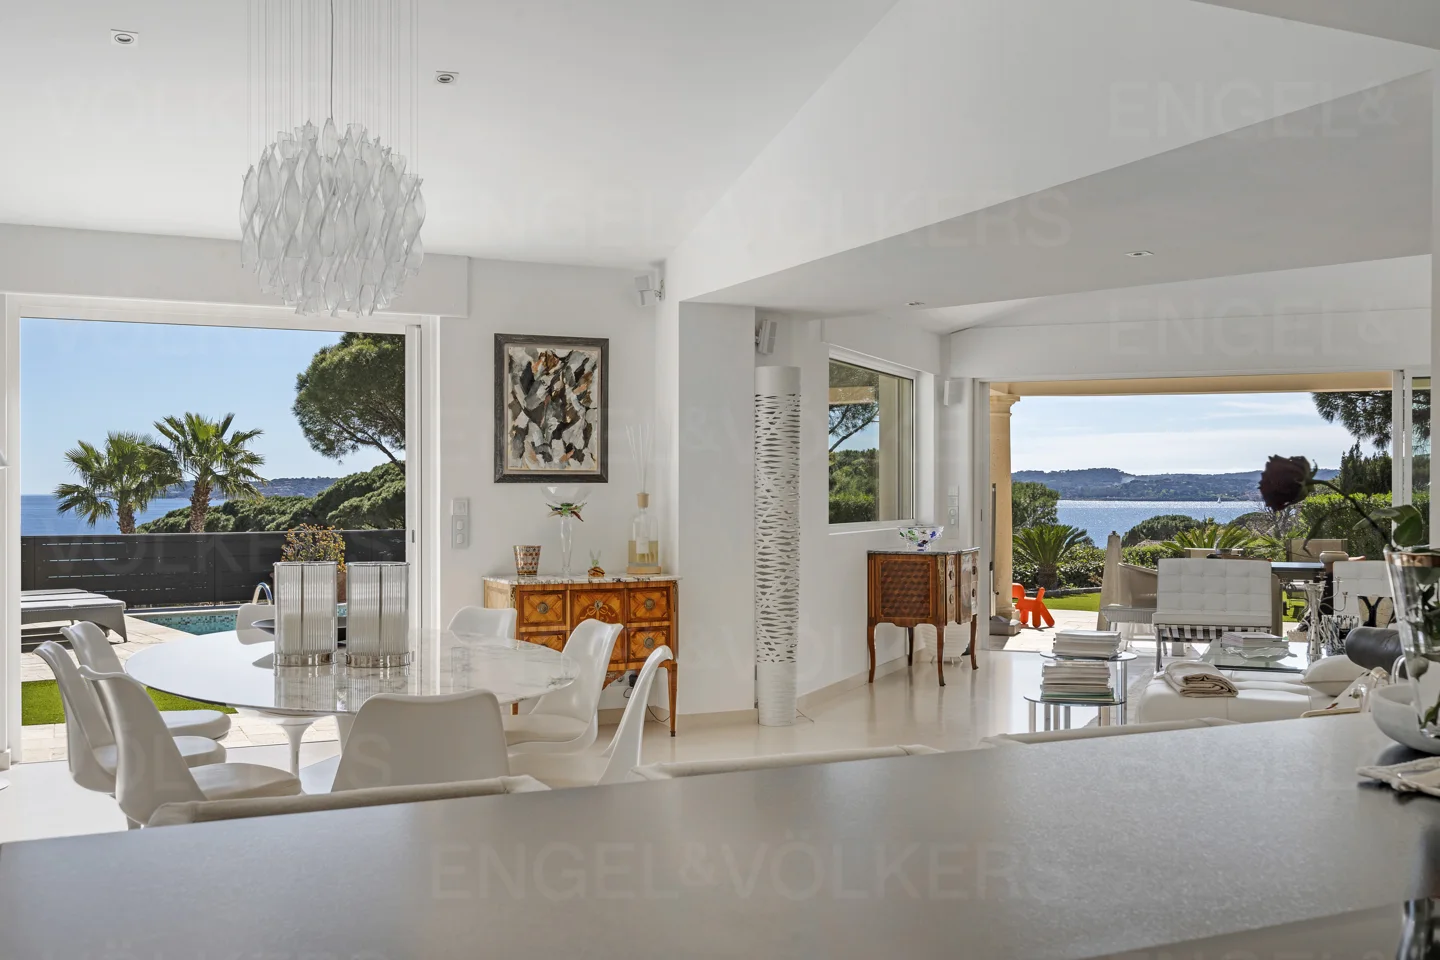 Neo-provençale property, walking distance to the town center and the beach.